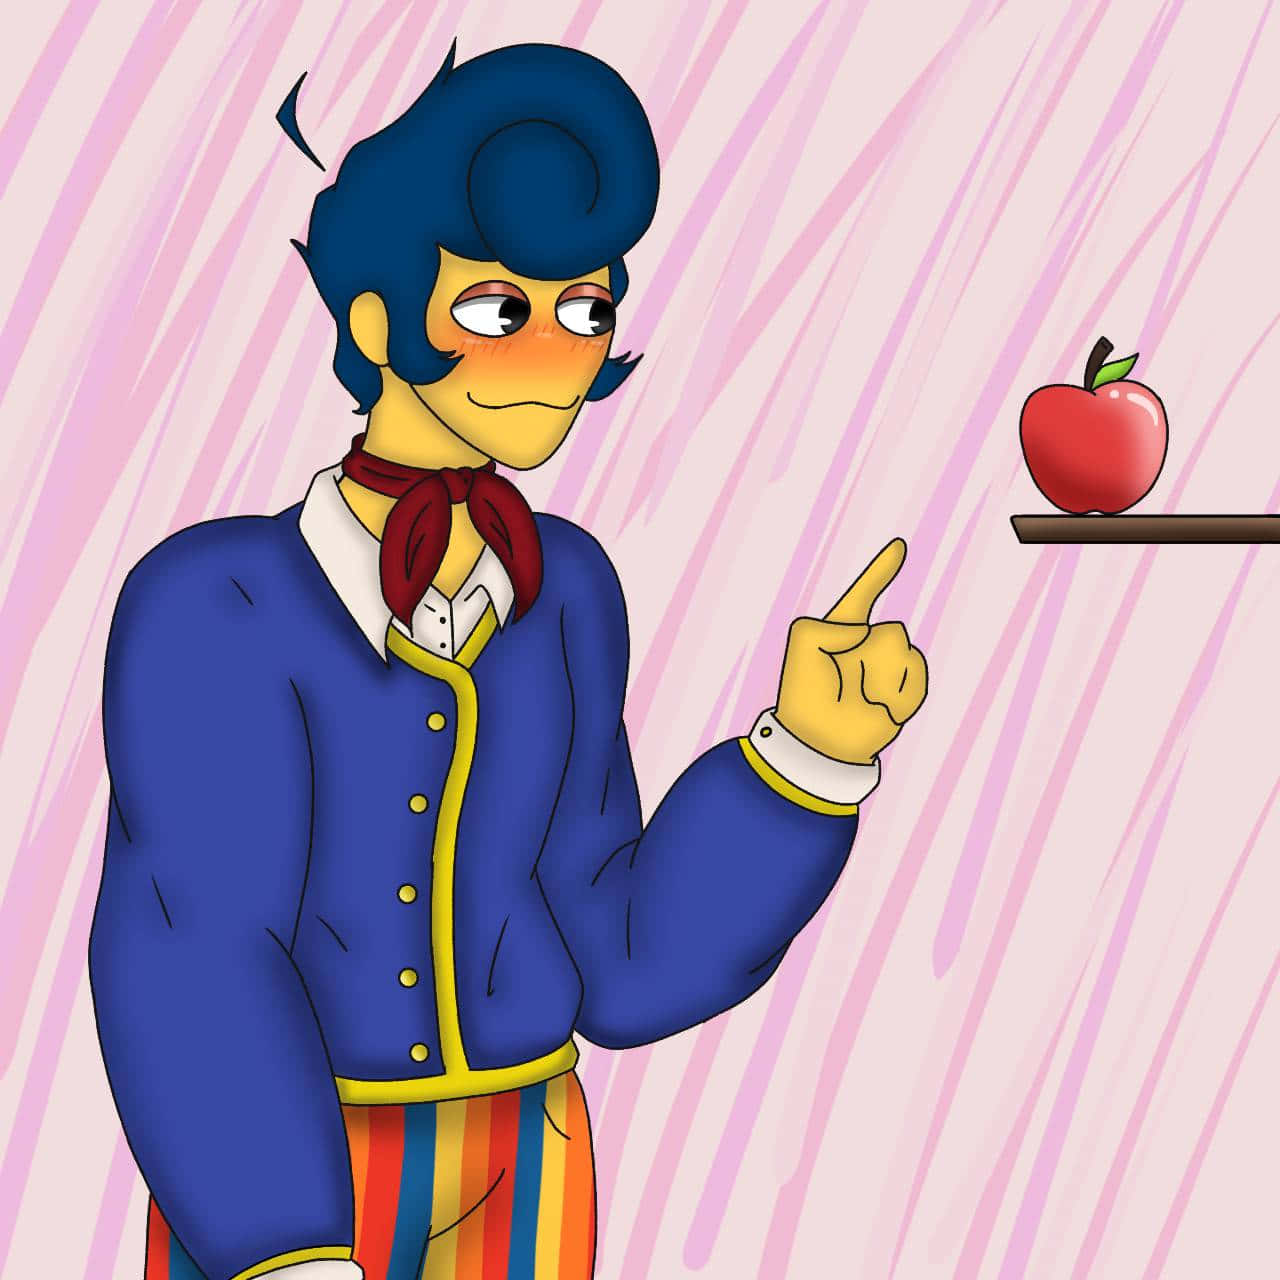 Animated Character Pointingat Apple Wallpaper